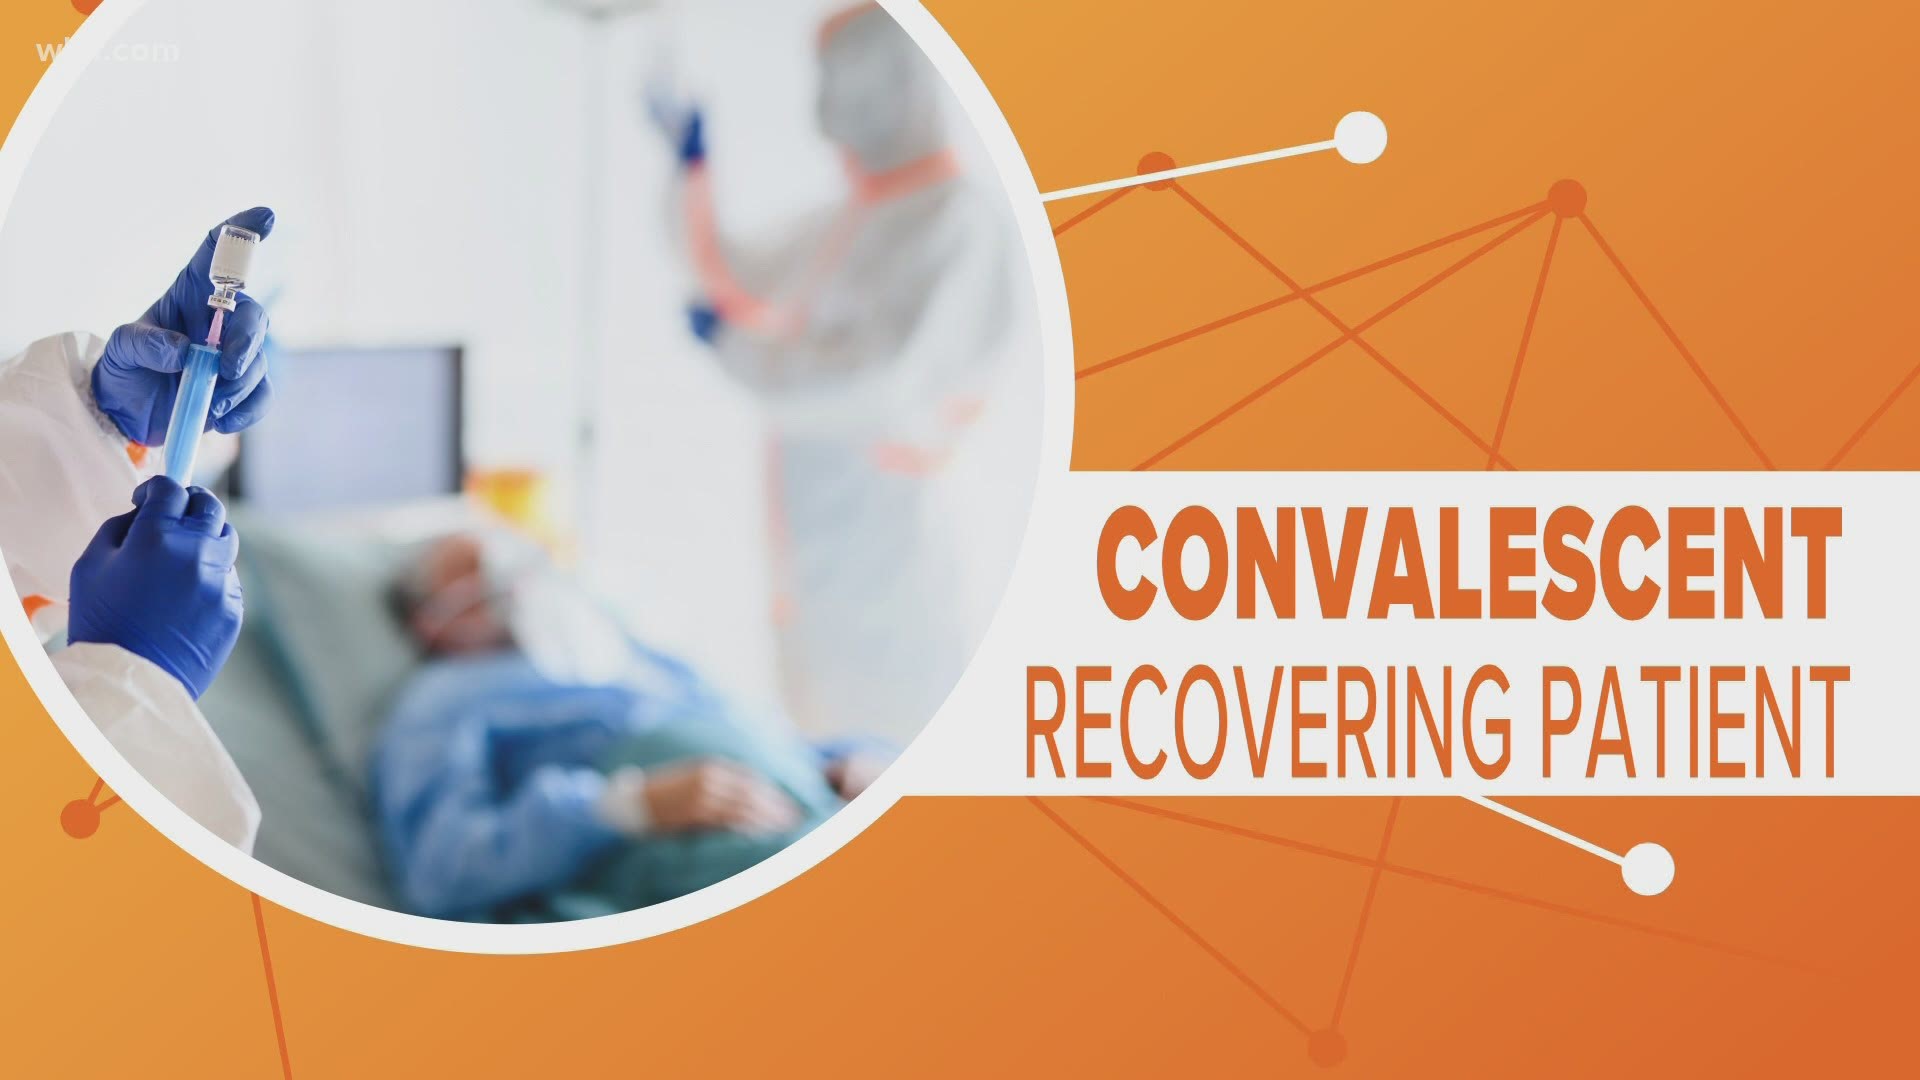 More than 70,000 people are using convalescent plasma as a treatment for COVID-19. Thousands more are on the list to receive it but how does it work and can it help?